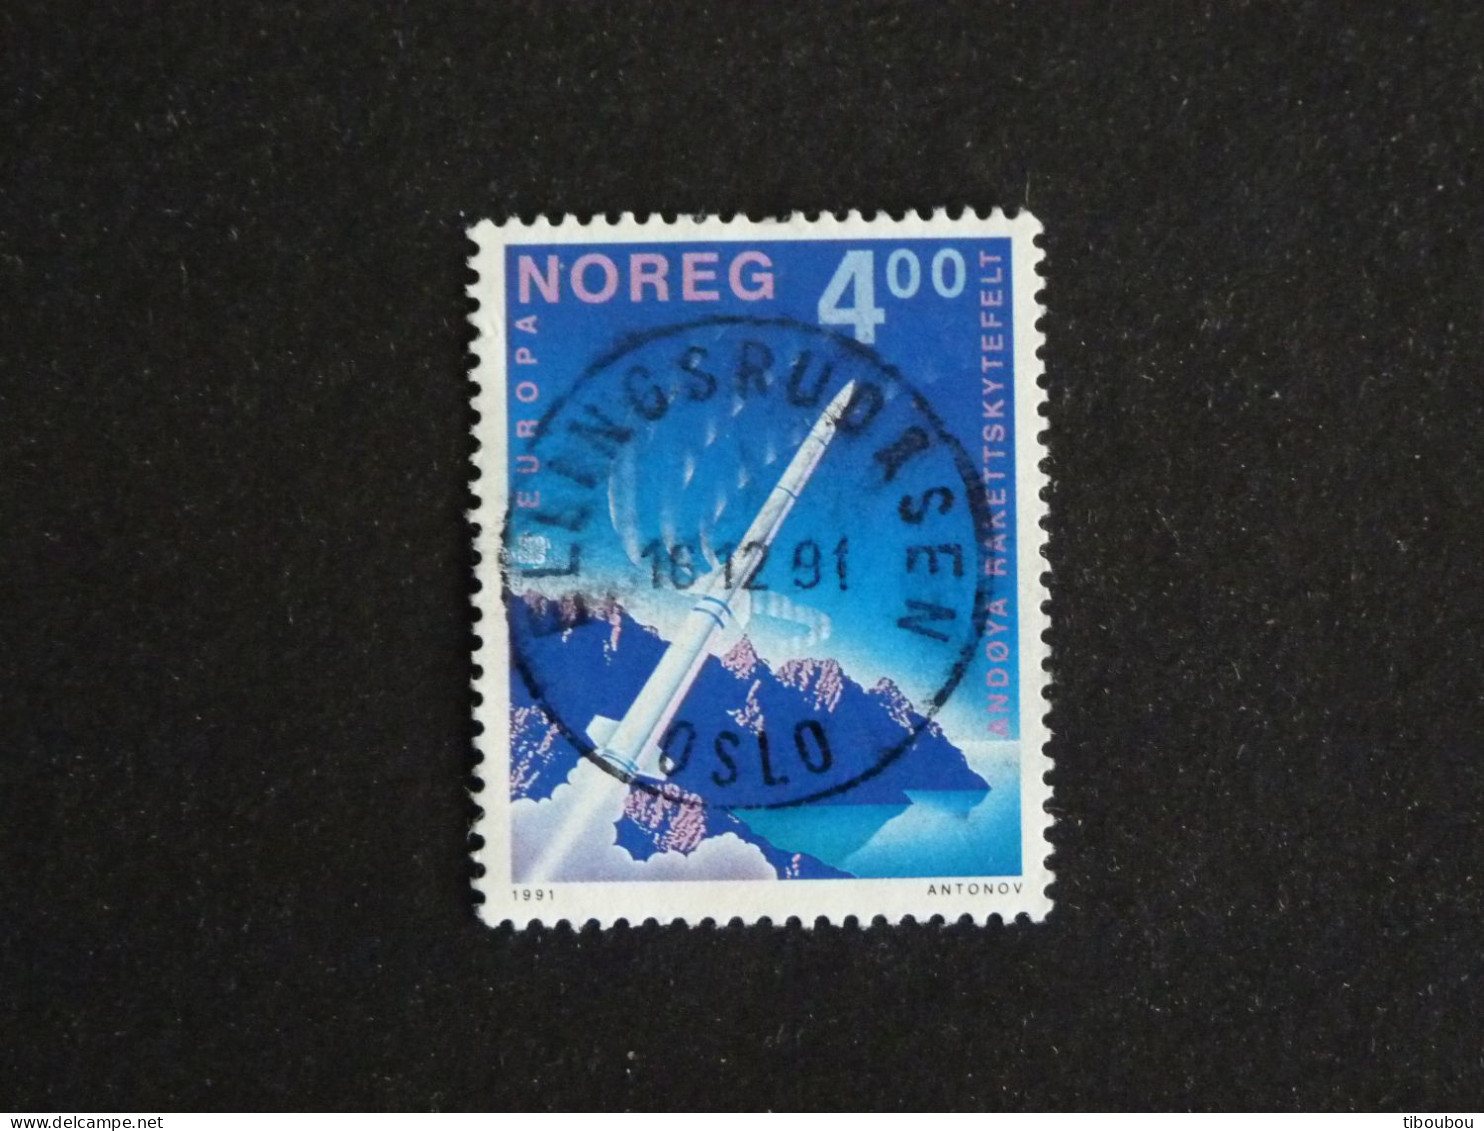 NORVEGE NORWAY NORGE NOREG YT 1020 OBLITERE - EUROPA BASE LANCEMENT ANDÖYA FUSEE - Used Stamps